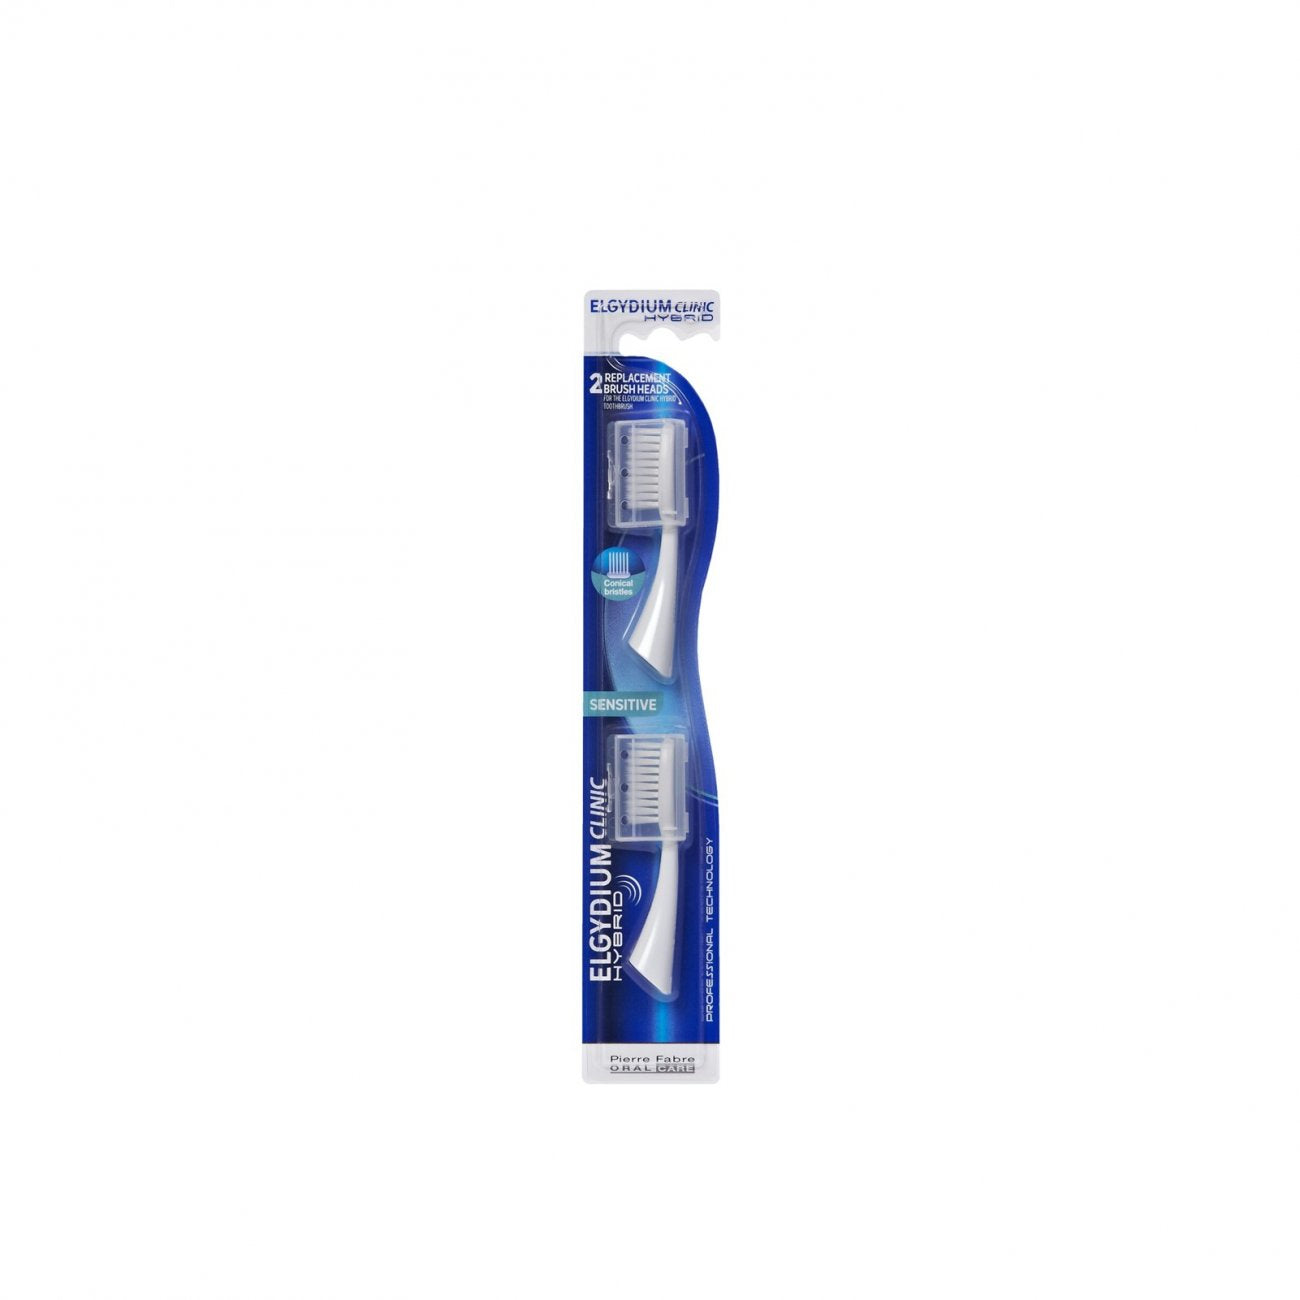 Clinic Hybrid Toothbrush Sensitive Replacement Head x2